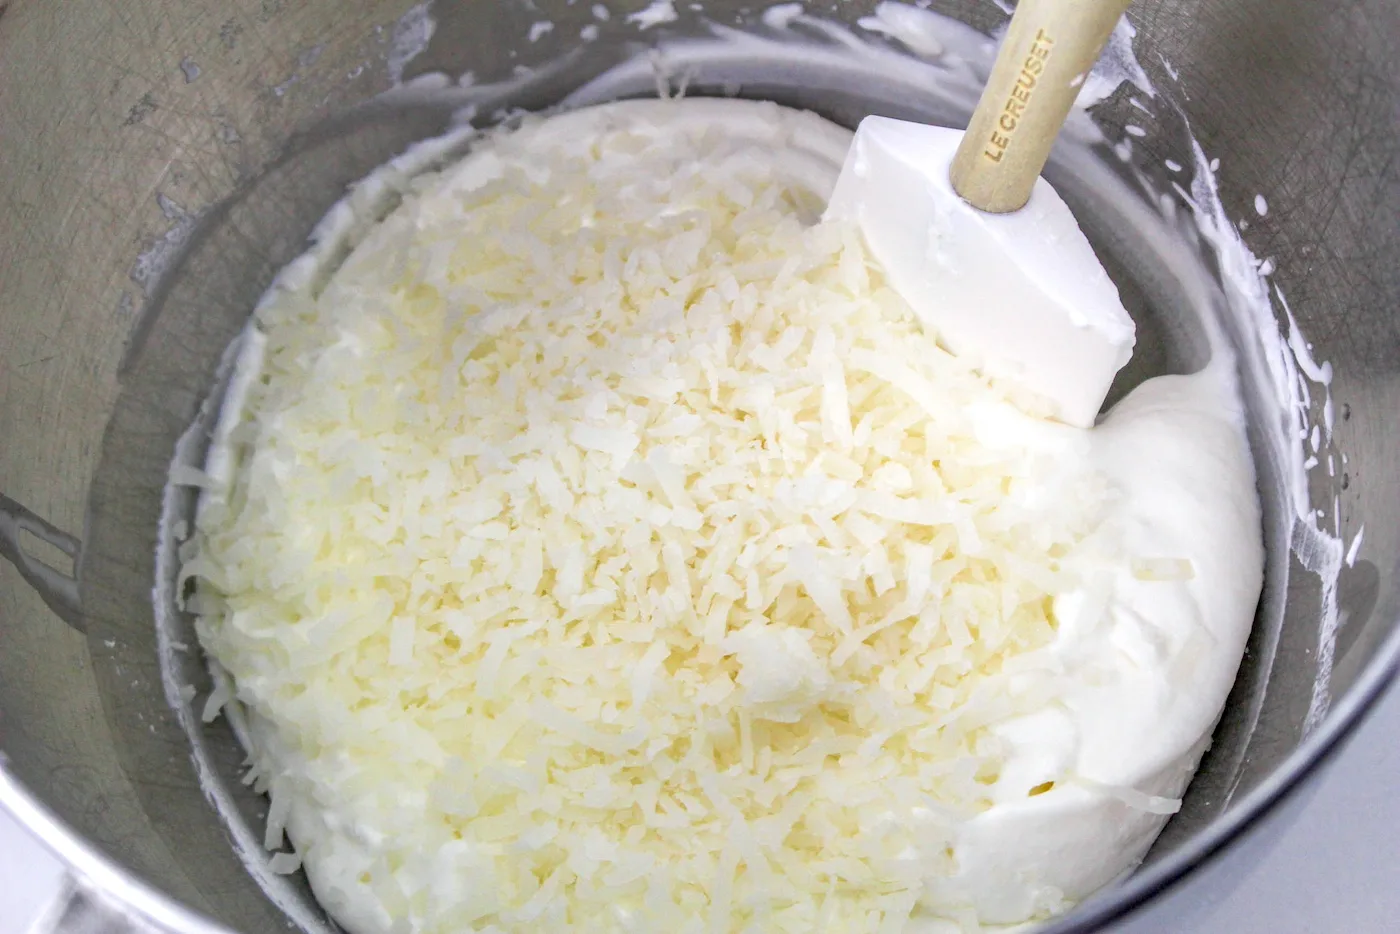 Adding cream of coconut and shredded coconut to the cream